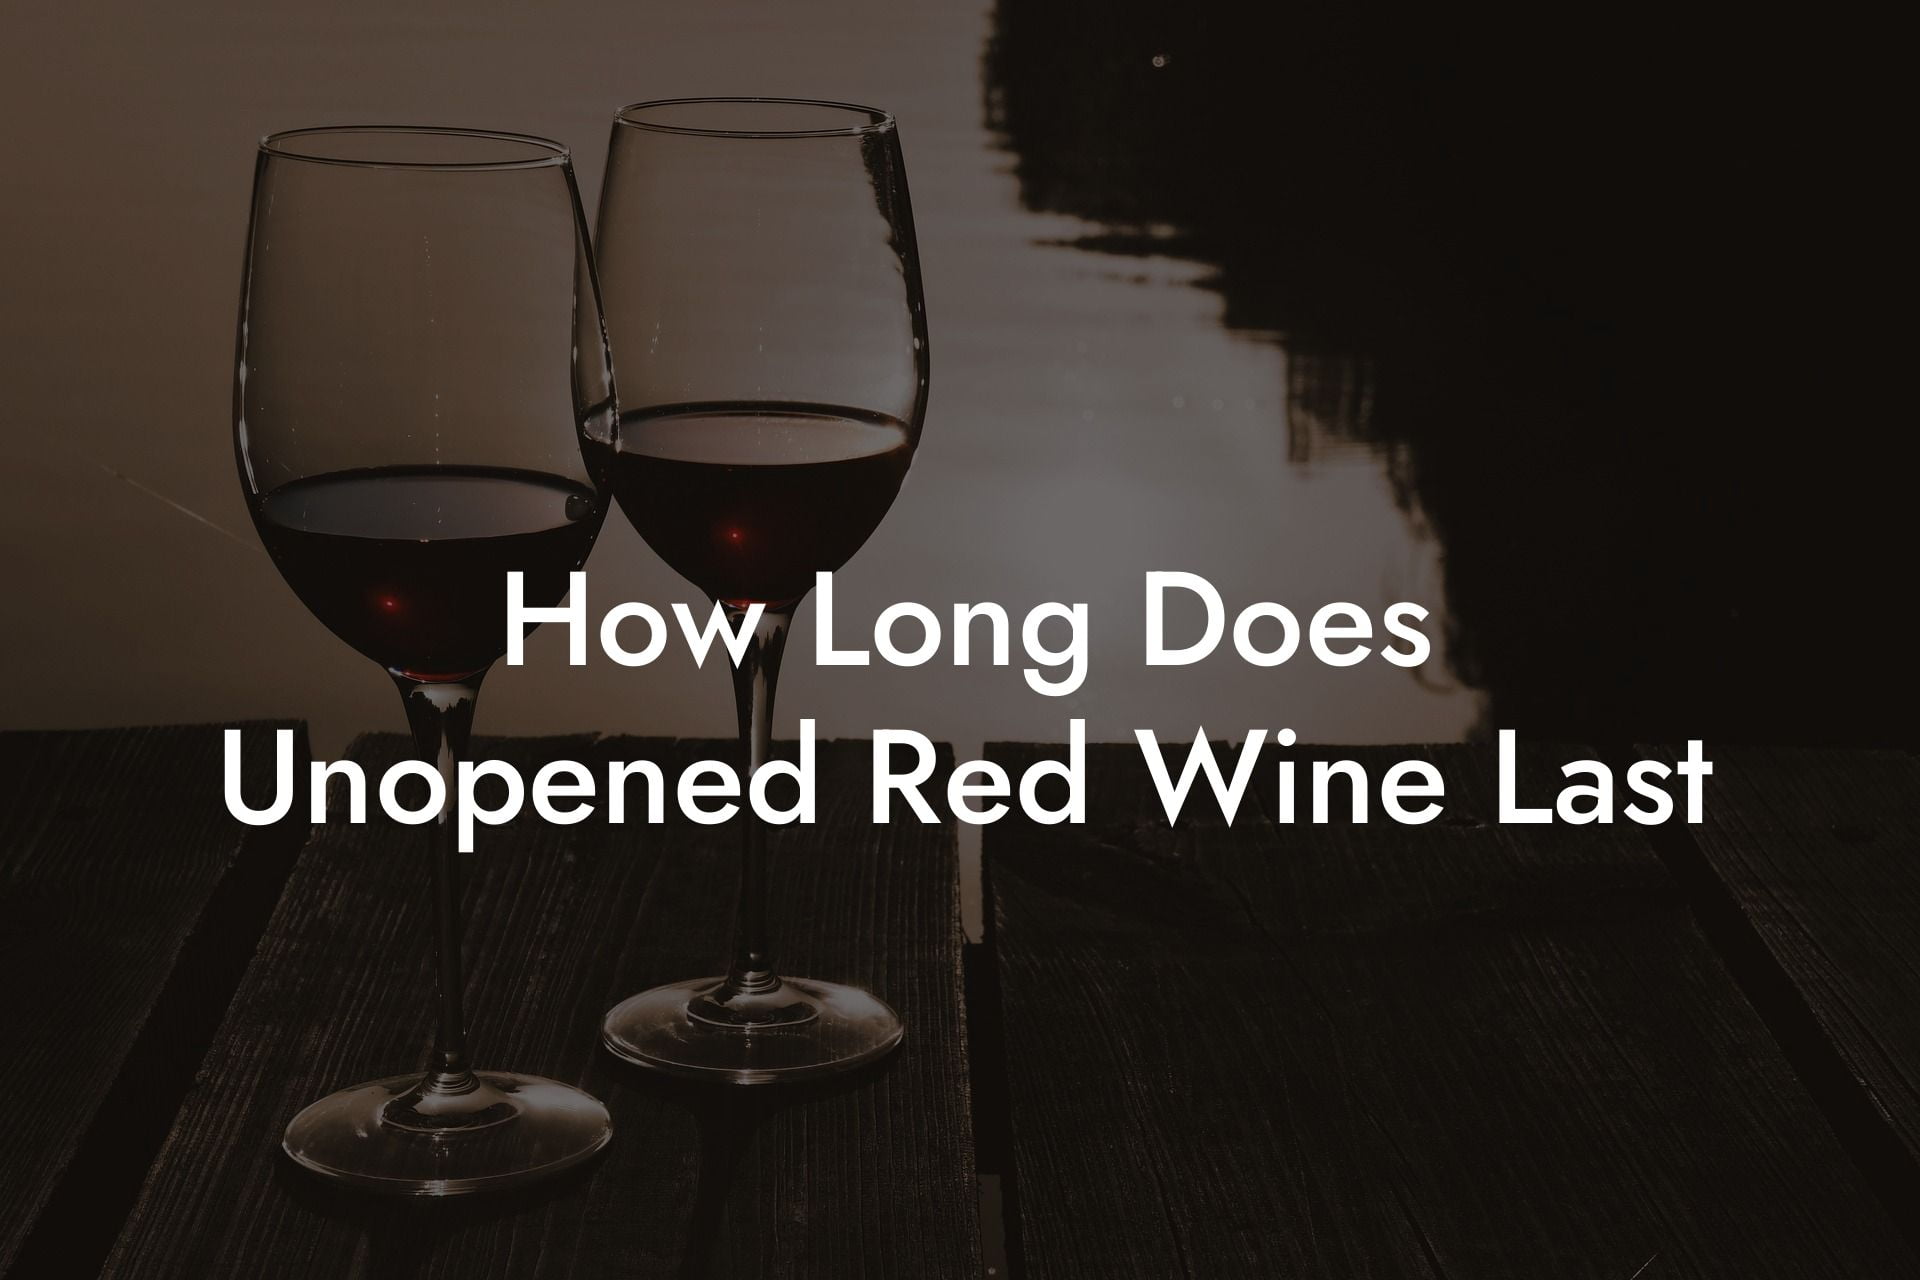 How Long Does Unopened Red Wine Last